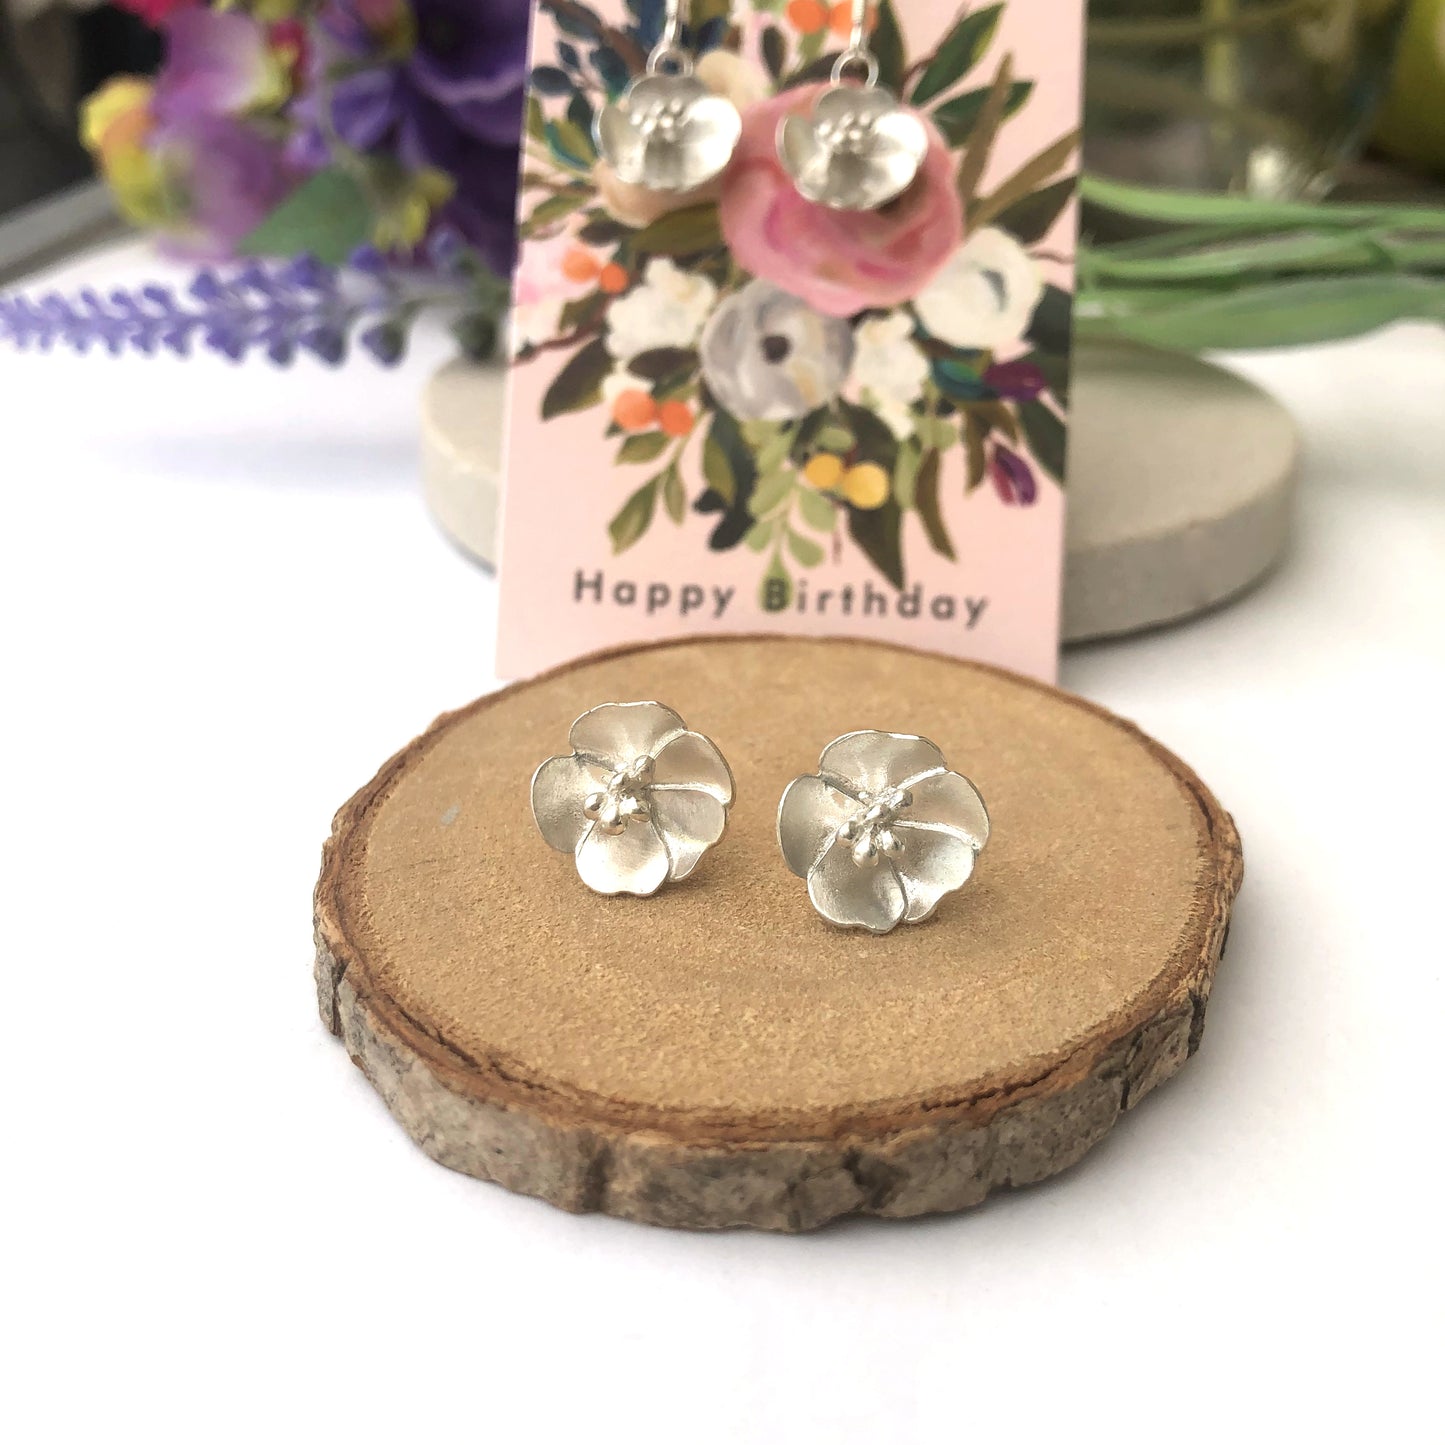 flower earrings with happy birthday card